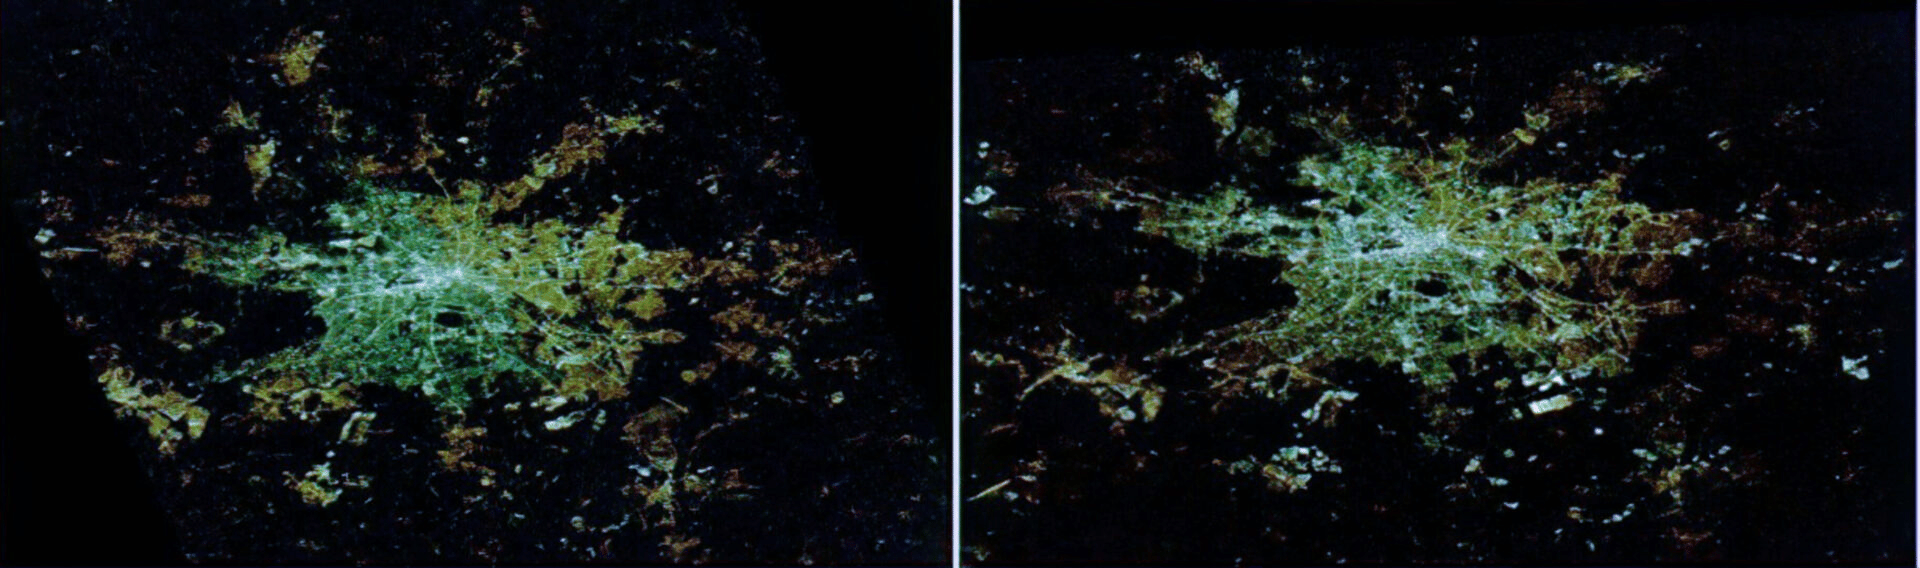 ISS astronauts mapped light pollution in Europe 4